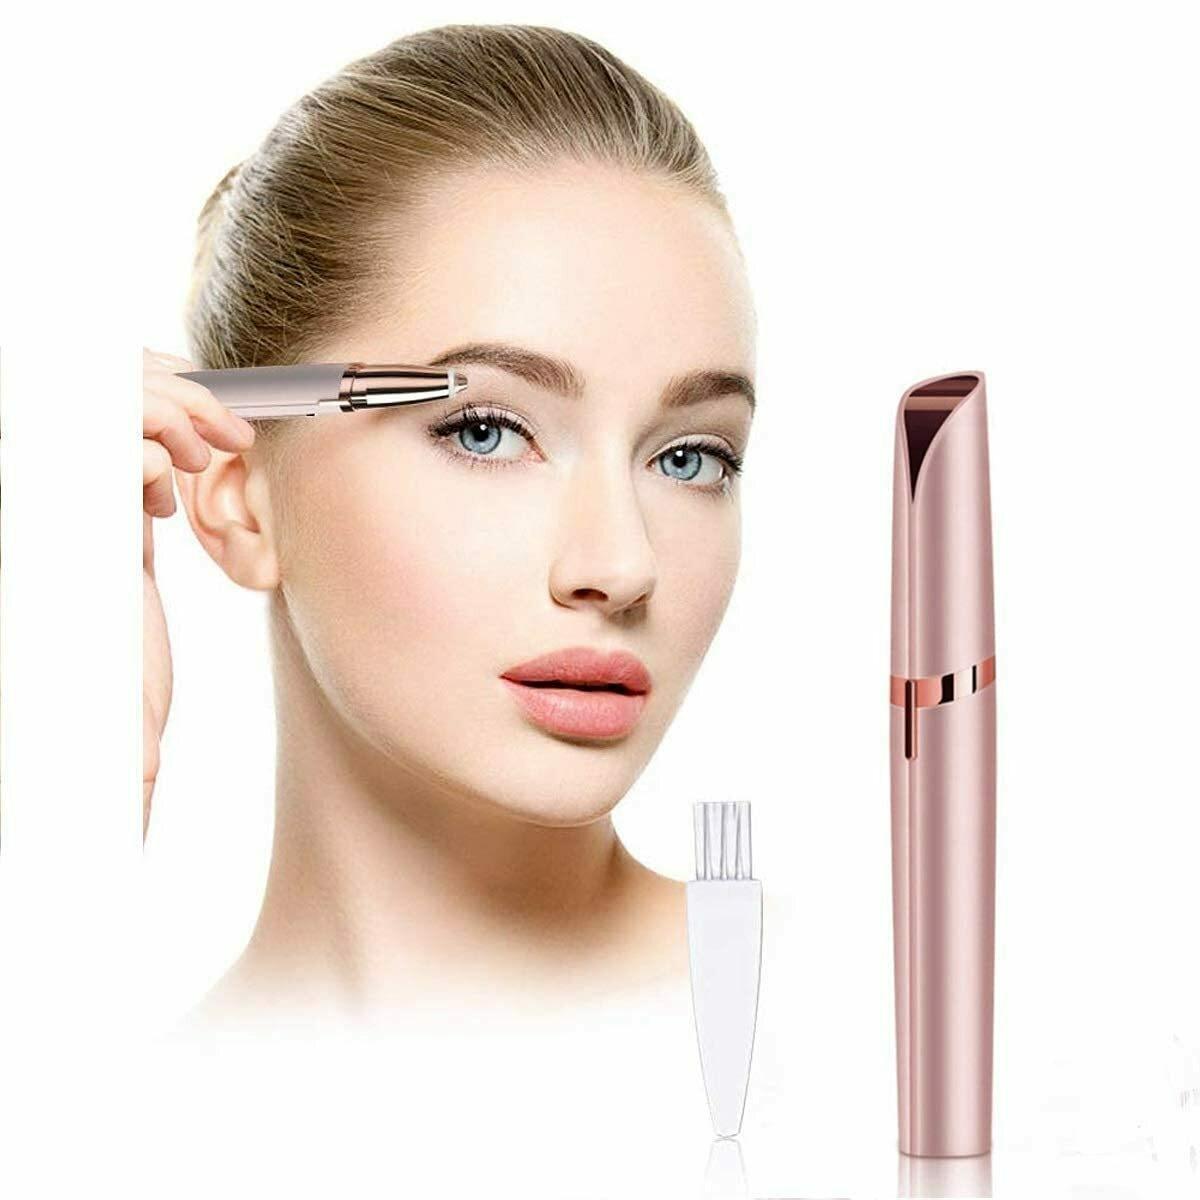 Rechargeable Eyebrow Hair Remover Painless-Precision Eyebrow Trimmer Eyebrow  Razor Tool For Face Lips Nose Facial | Facial Hair Remover, Painless Eyebrow  Trimmer, Lips Nose Body Facial Hair Removal Tool 